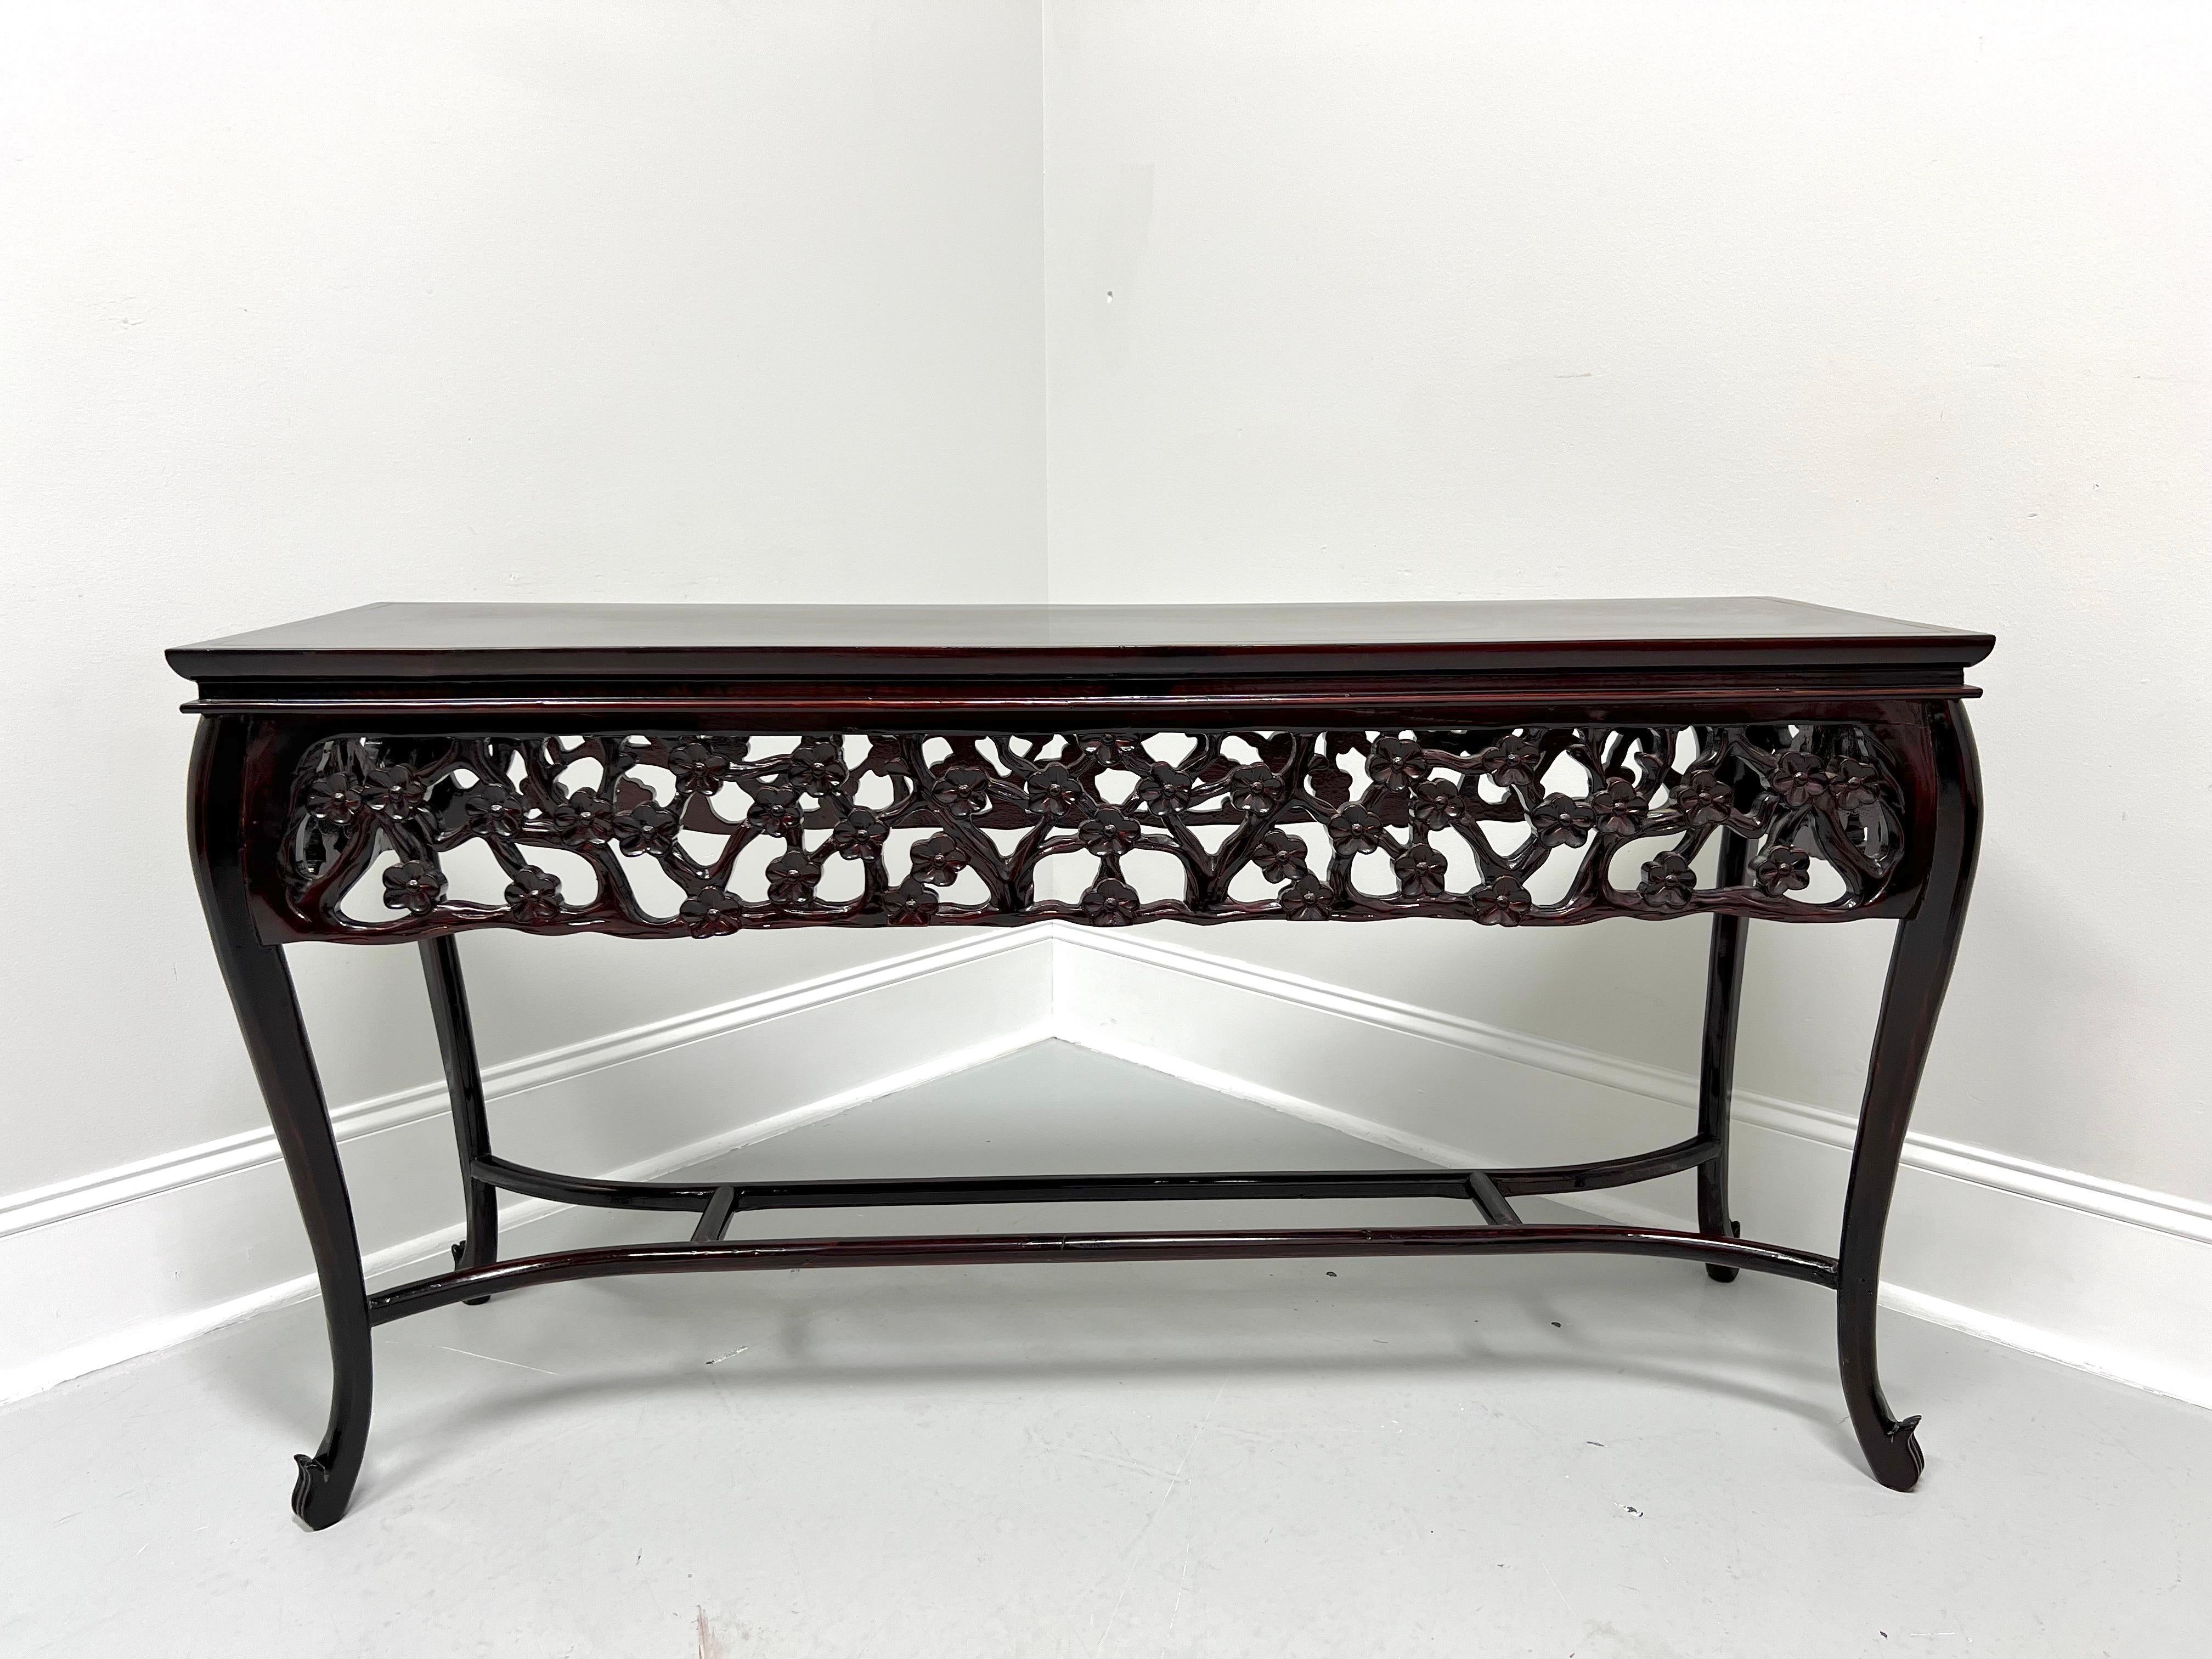 Chinoiserie Mid 20th Century Carved Rosewood Finish Asian Style Console Sofa Table